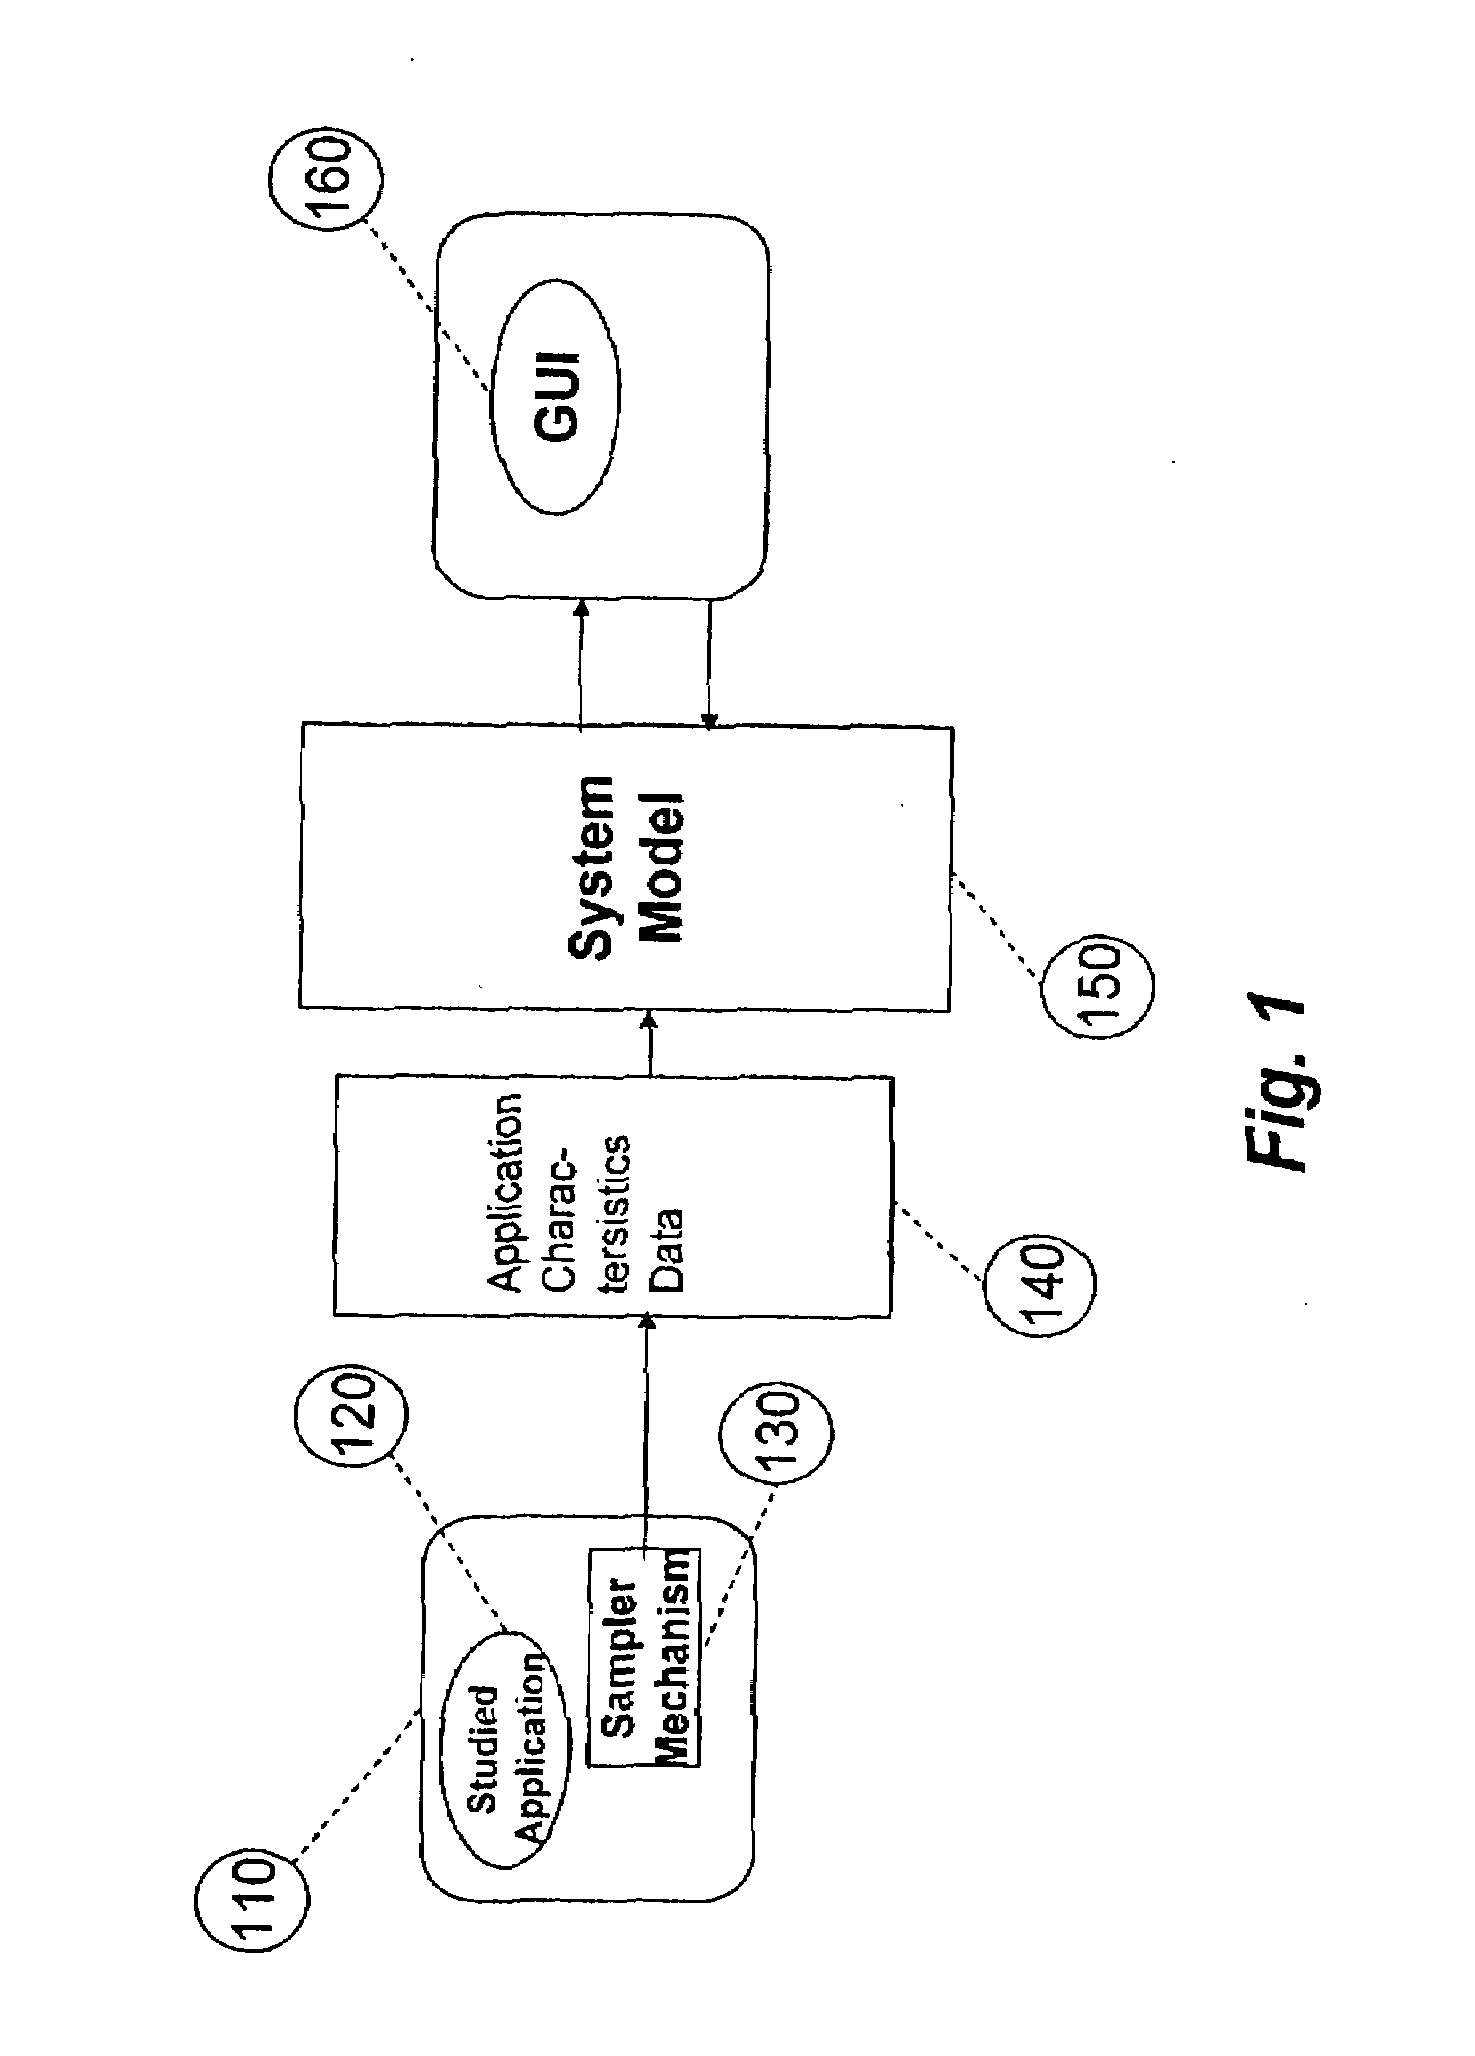 System for and Method of Capturing Performance Characteristics Data From A Computer System and Modeling Target System Performance